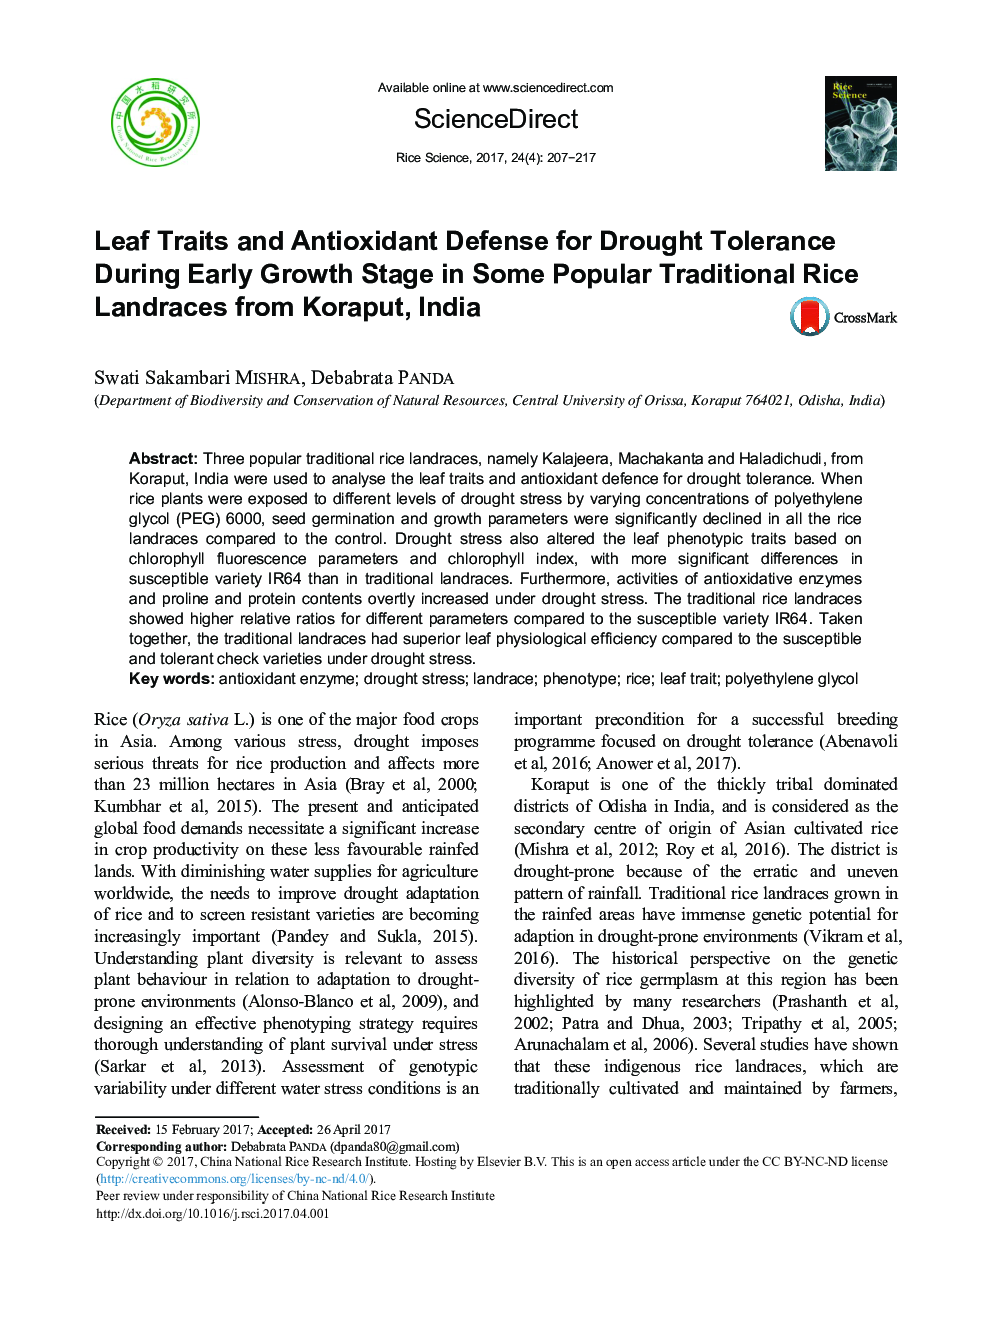 Leaf Traits and Antioxidant Defense for Drought Tolerance During Early Growth Stage in Some Popular Traditional Rice Landraces from Koraput, India